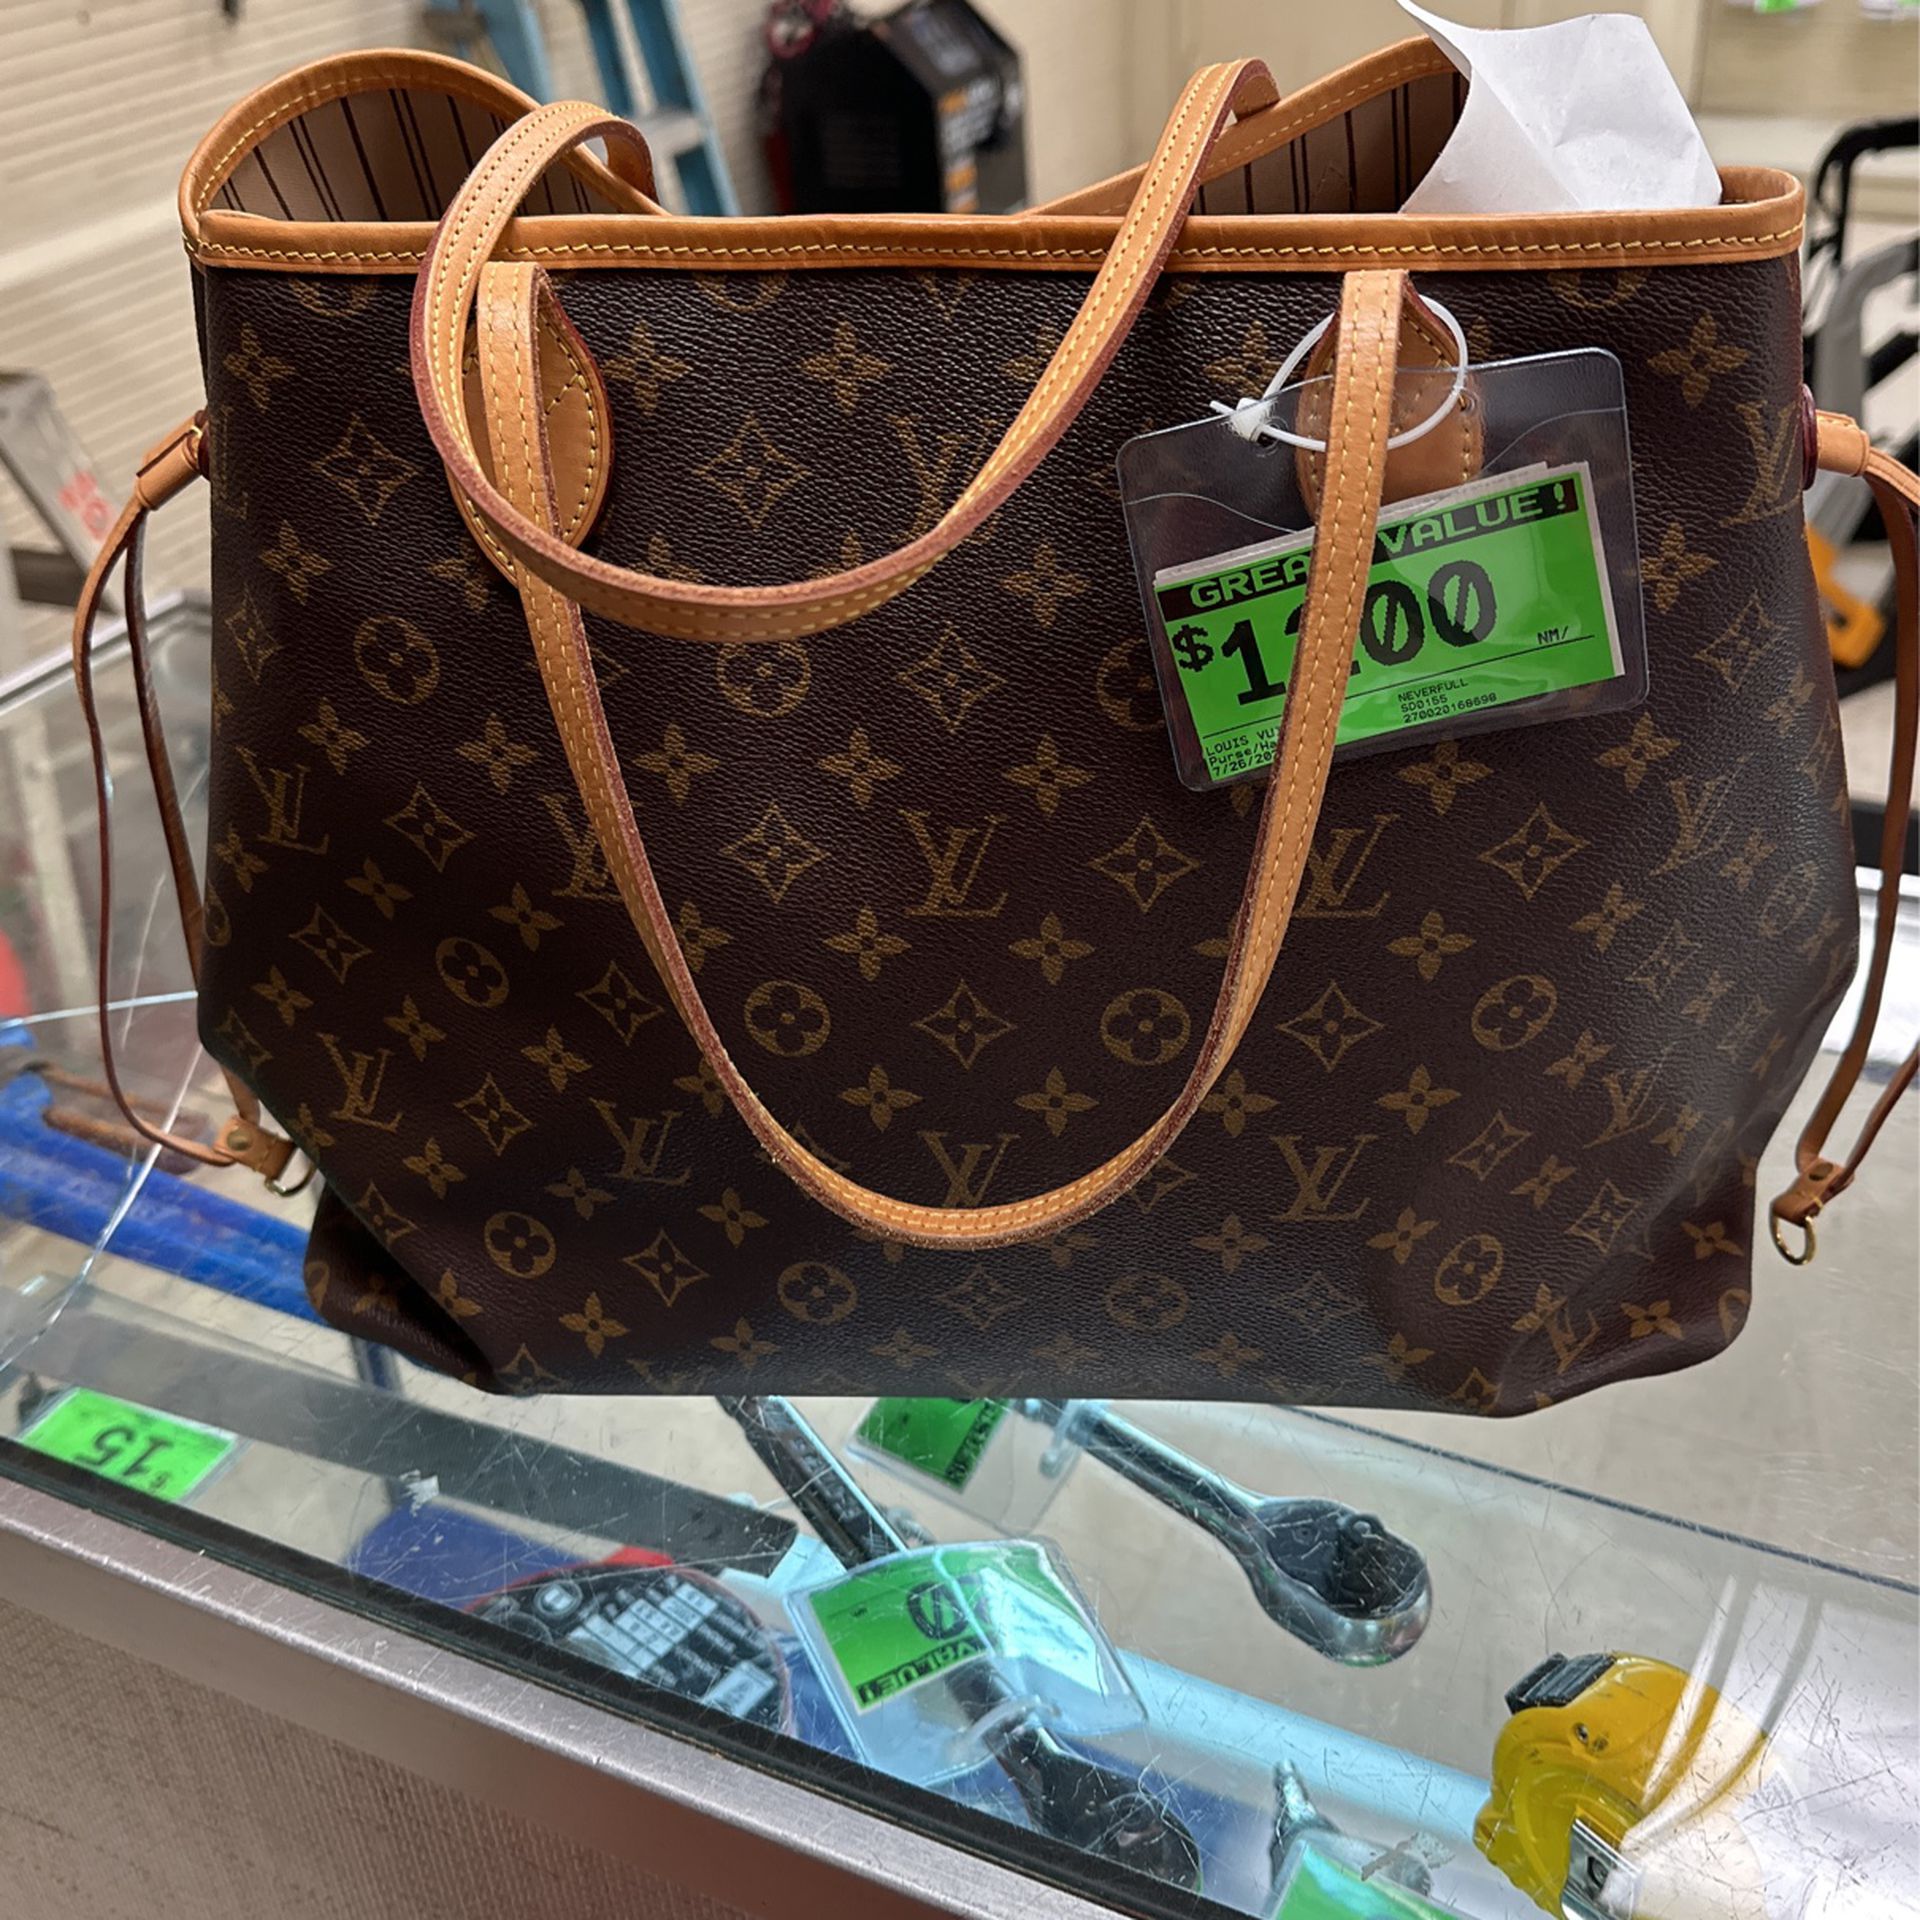 Louis Vuitton Bag for Sale in Houston, TX - OfferUp